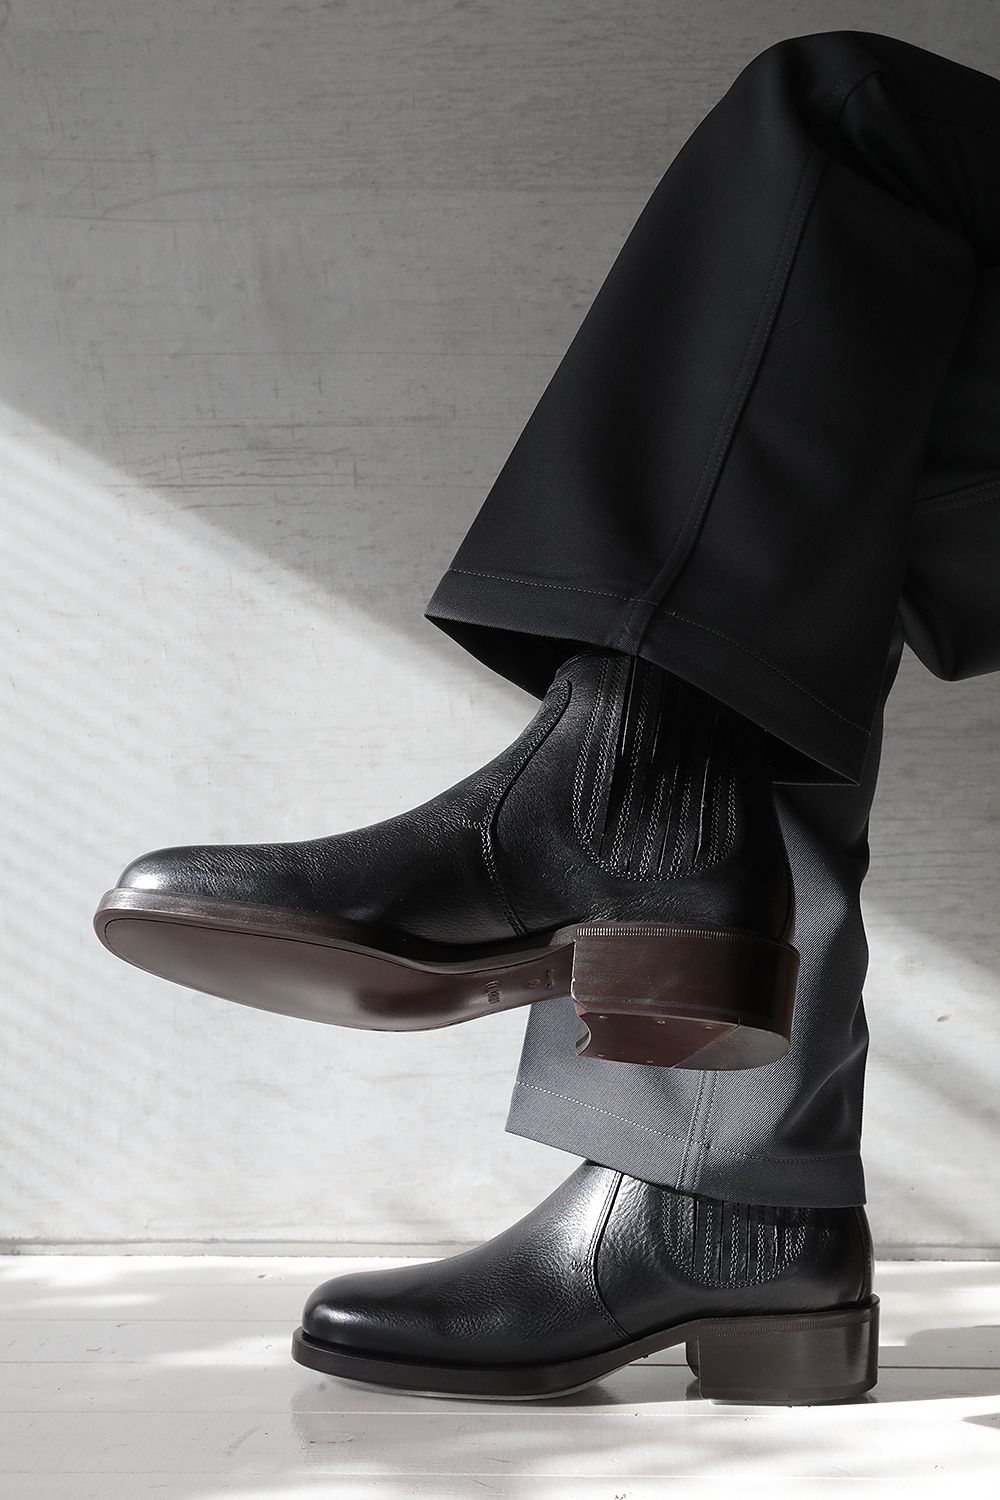 LEMAIRE - CHELSEA BOOTS(BLACK) | Acacia ONLINESTORE